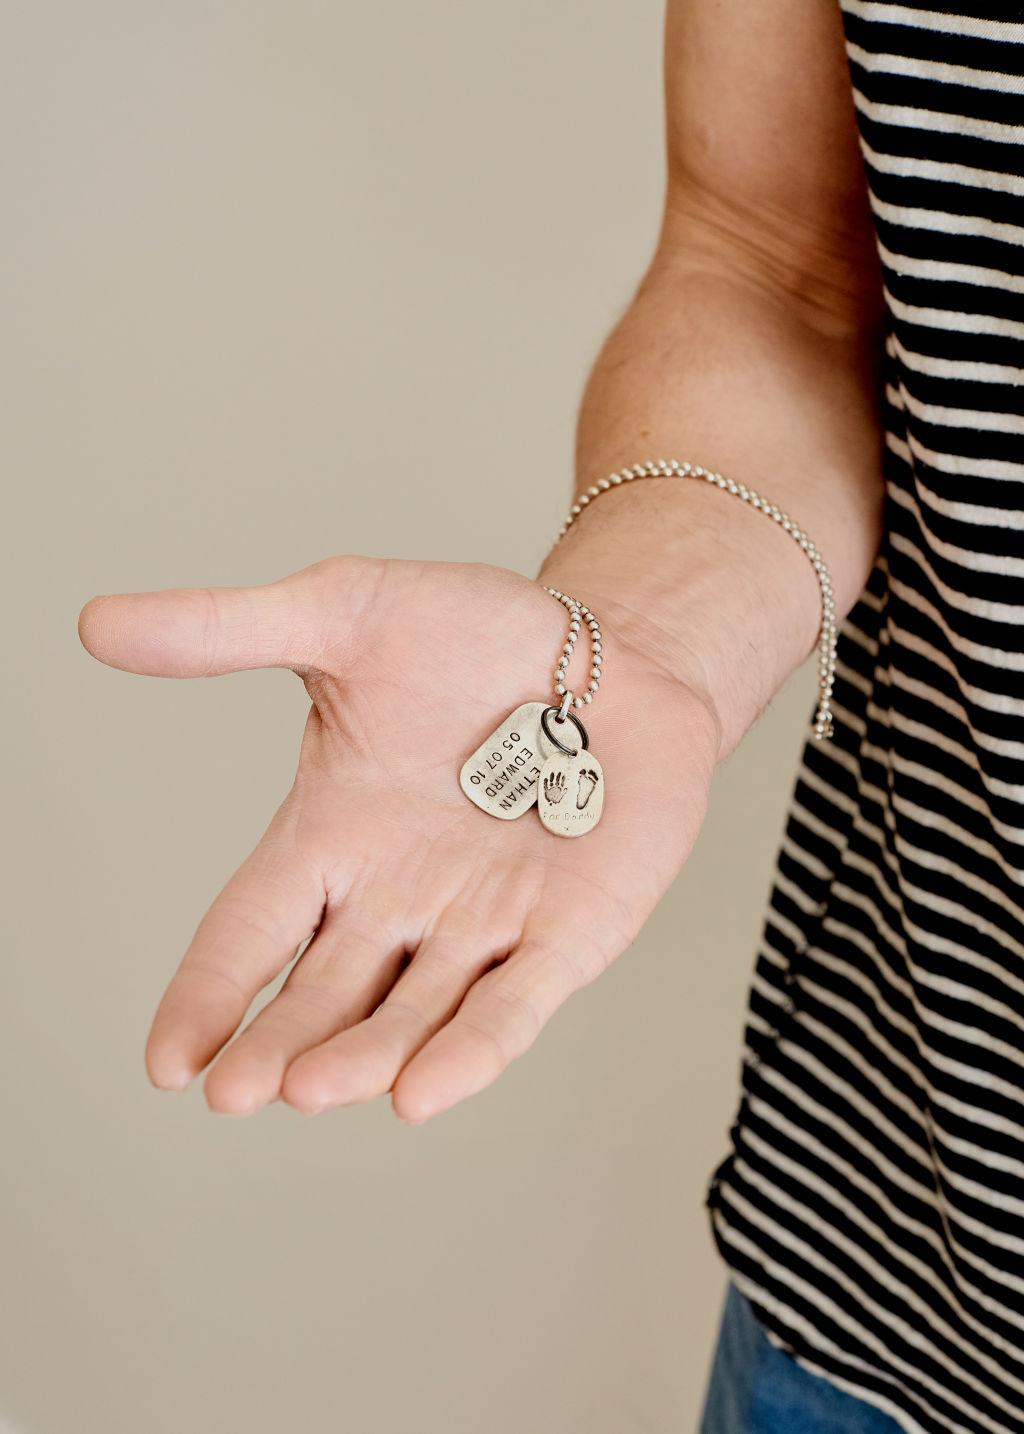 'The dog tags are a gift for the birth of my son Ethan.' Photo: Amelia Stanwix